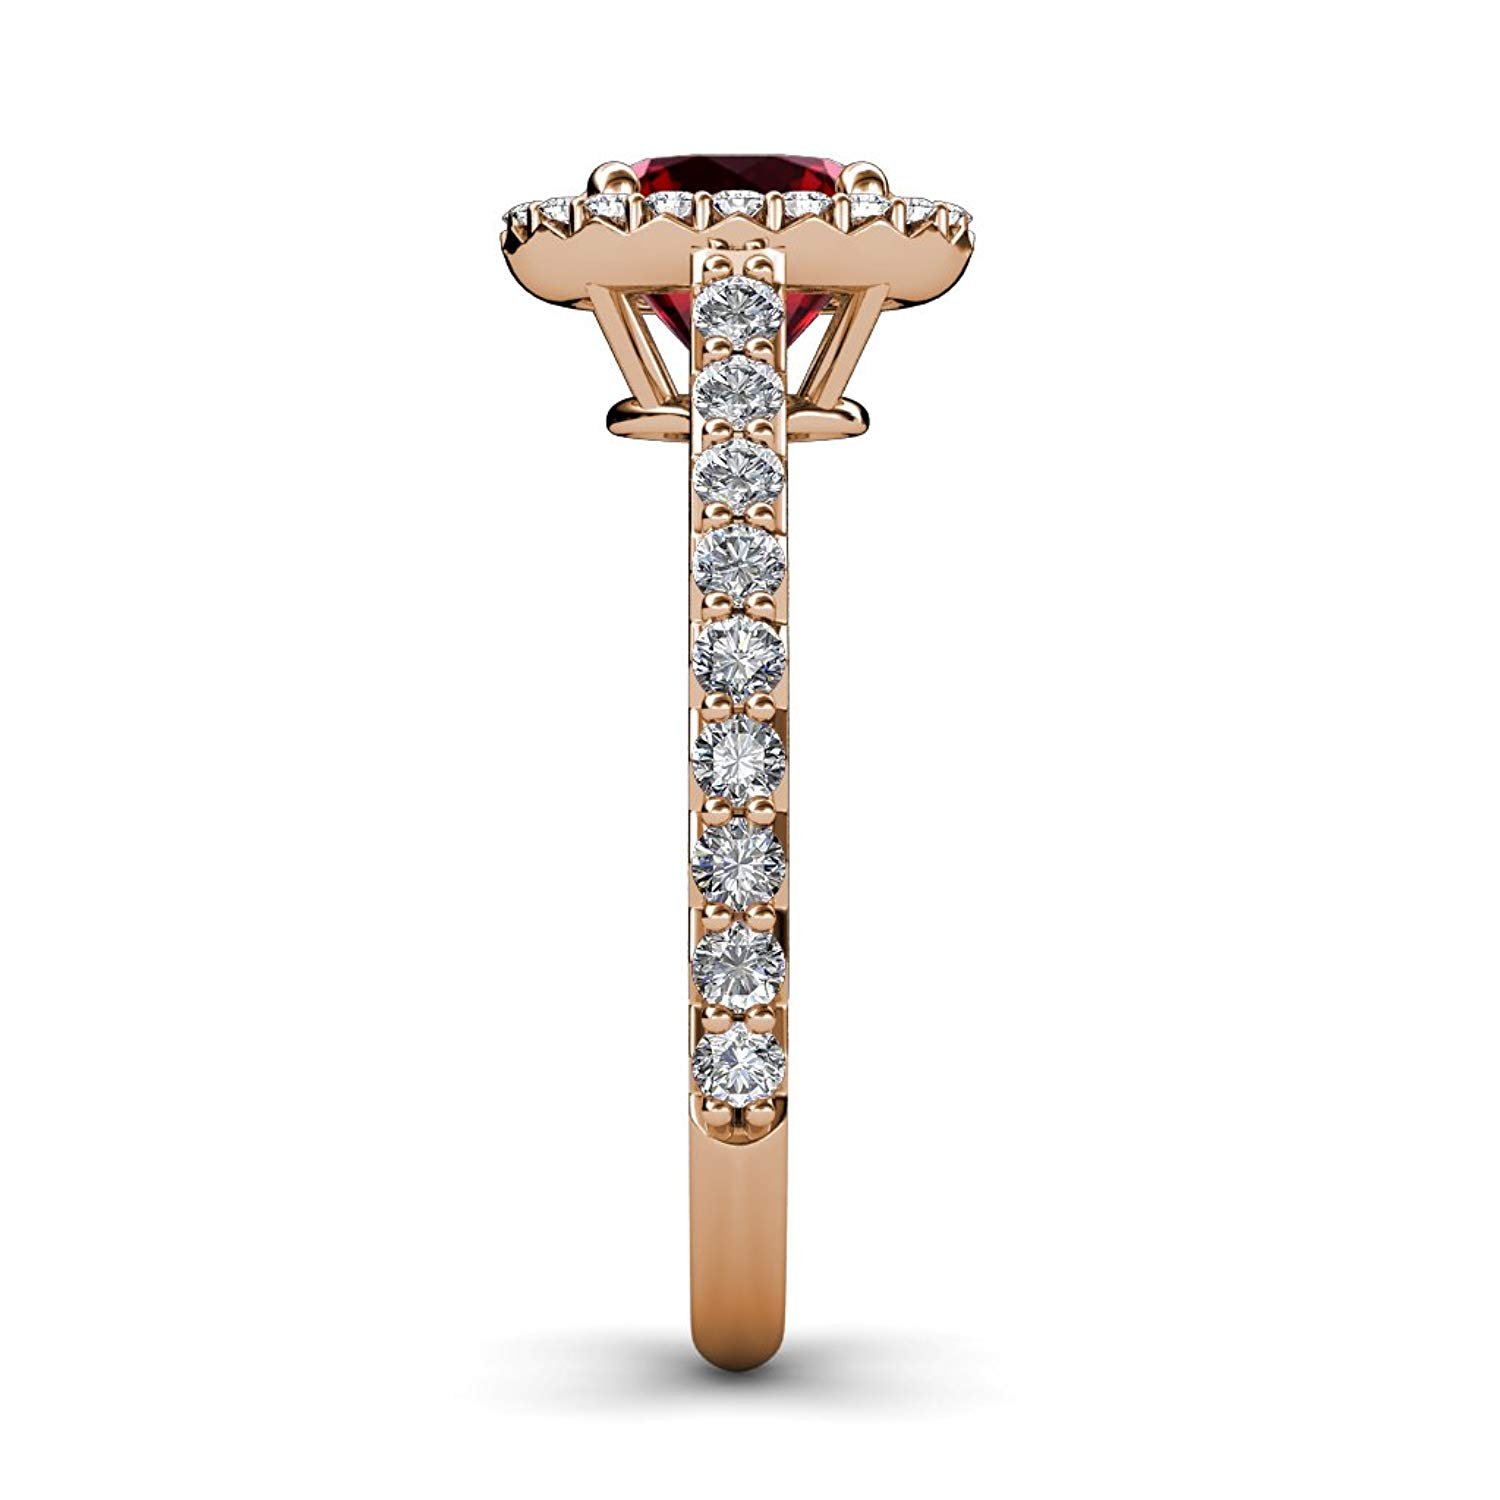 Ruby and Diamond (SI2-I1, G-H) Halo Engagement Ring 1.33 ct tw in 14K Rose Gold.size 8.5 - image 5 of 8